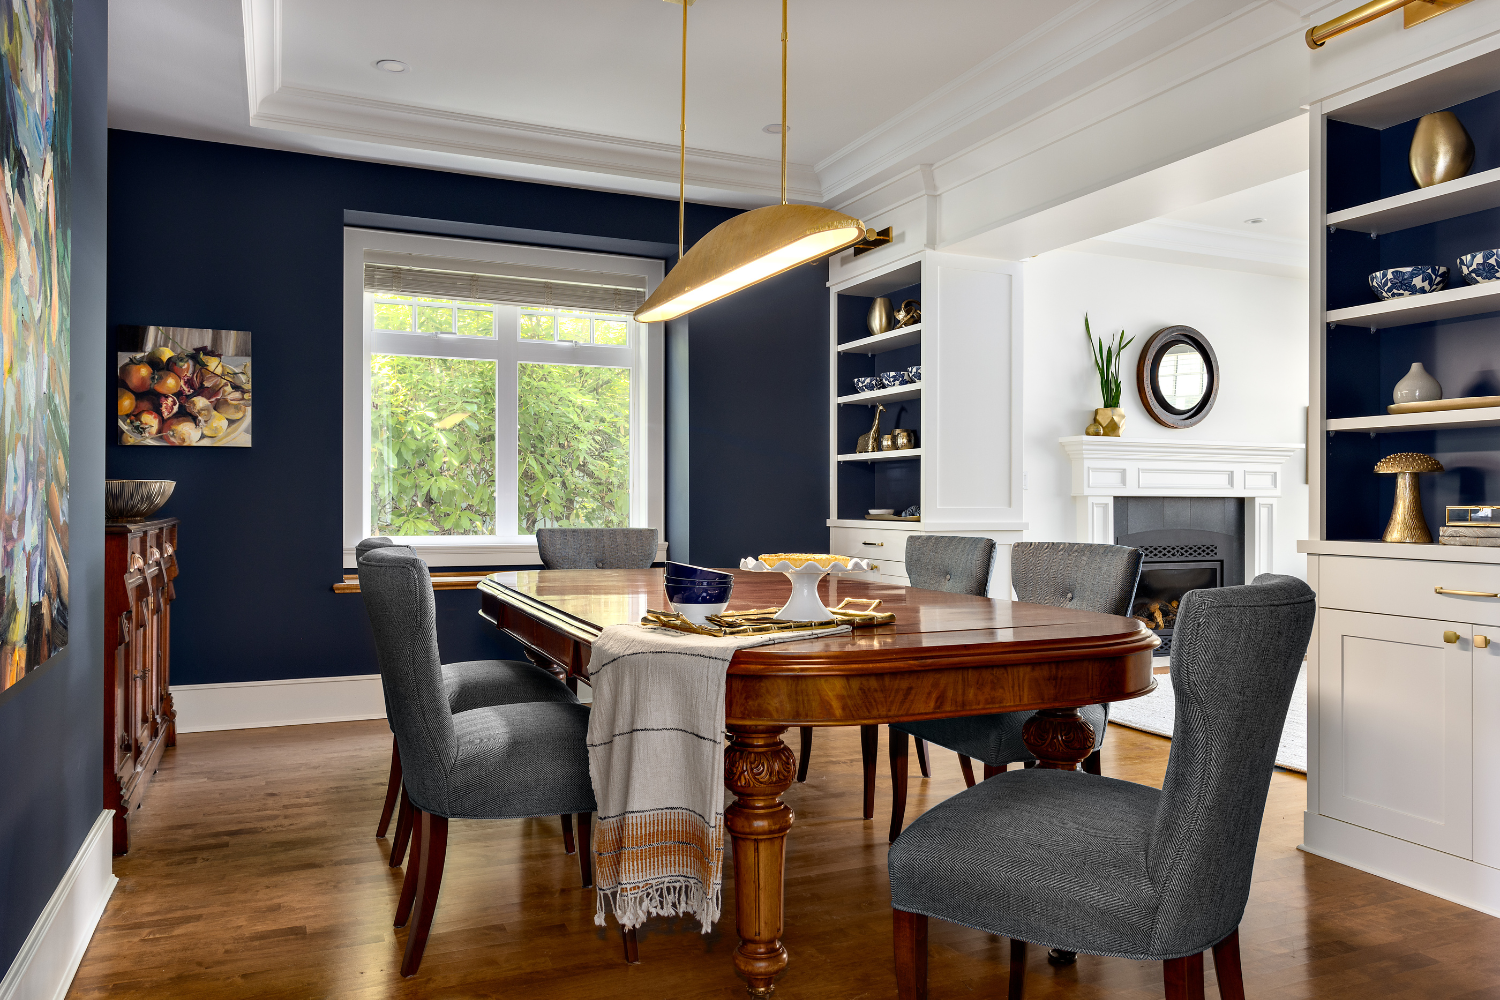 simply-home-decorating-north-vancouver-bc-ca-bold-dramatic-dining-room-dark-blue-walls-antique-table-modern-accessories-contemporary-interior-design